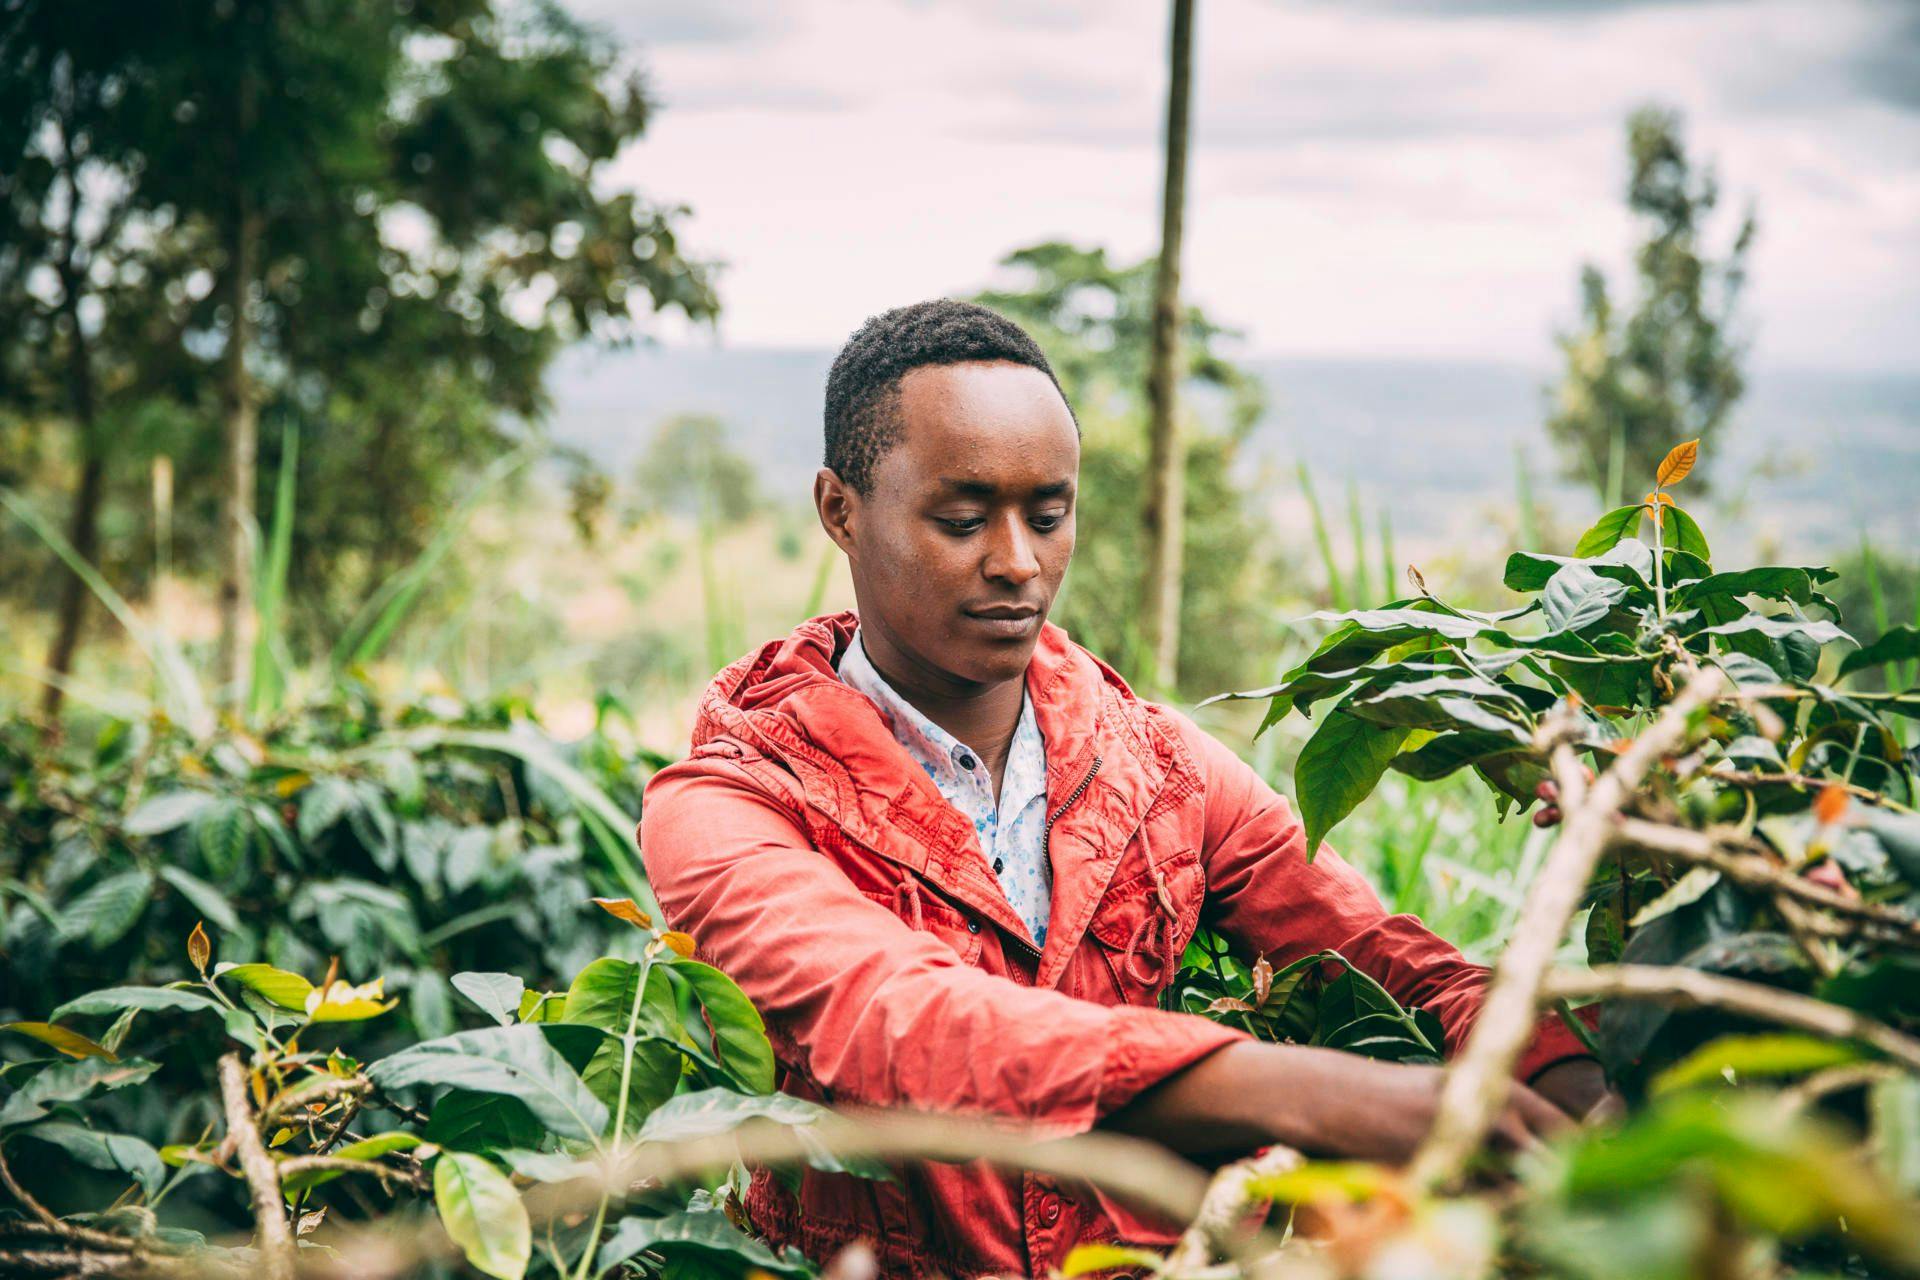 Addressing the effects of COVID-19 on coffee farmers in Tanzania